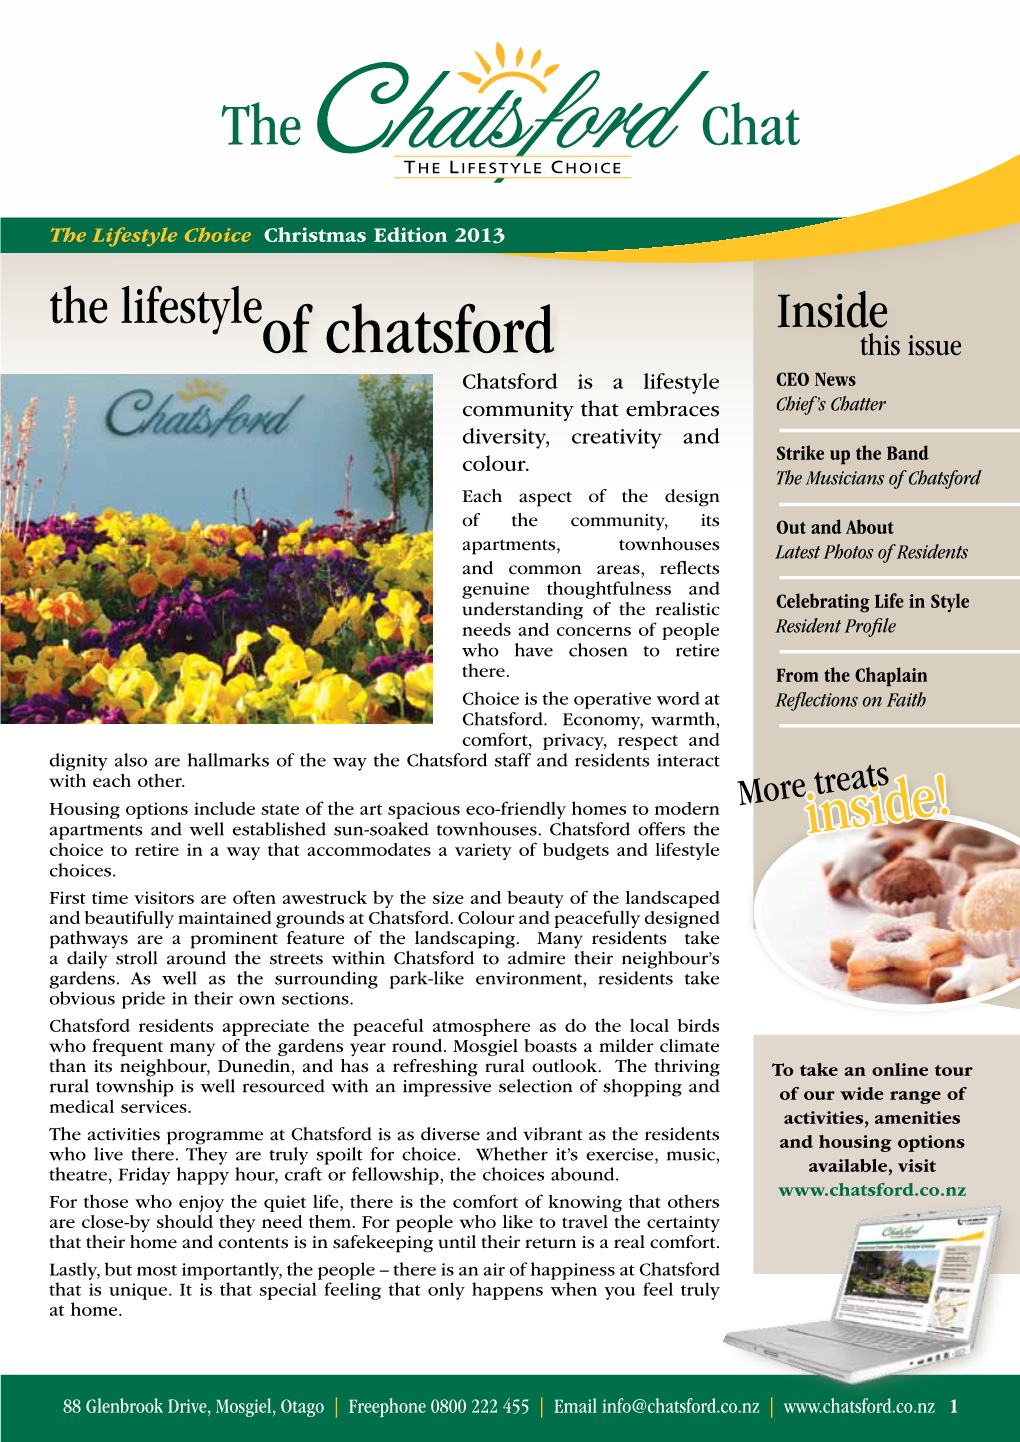 Of Chatsford This Issue Chatsford Is a Lifestyle CEO News Community That Embraces Chief’S Chatter Diversity, Creativity and Colour